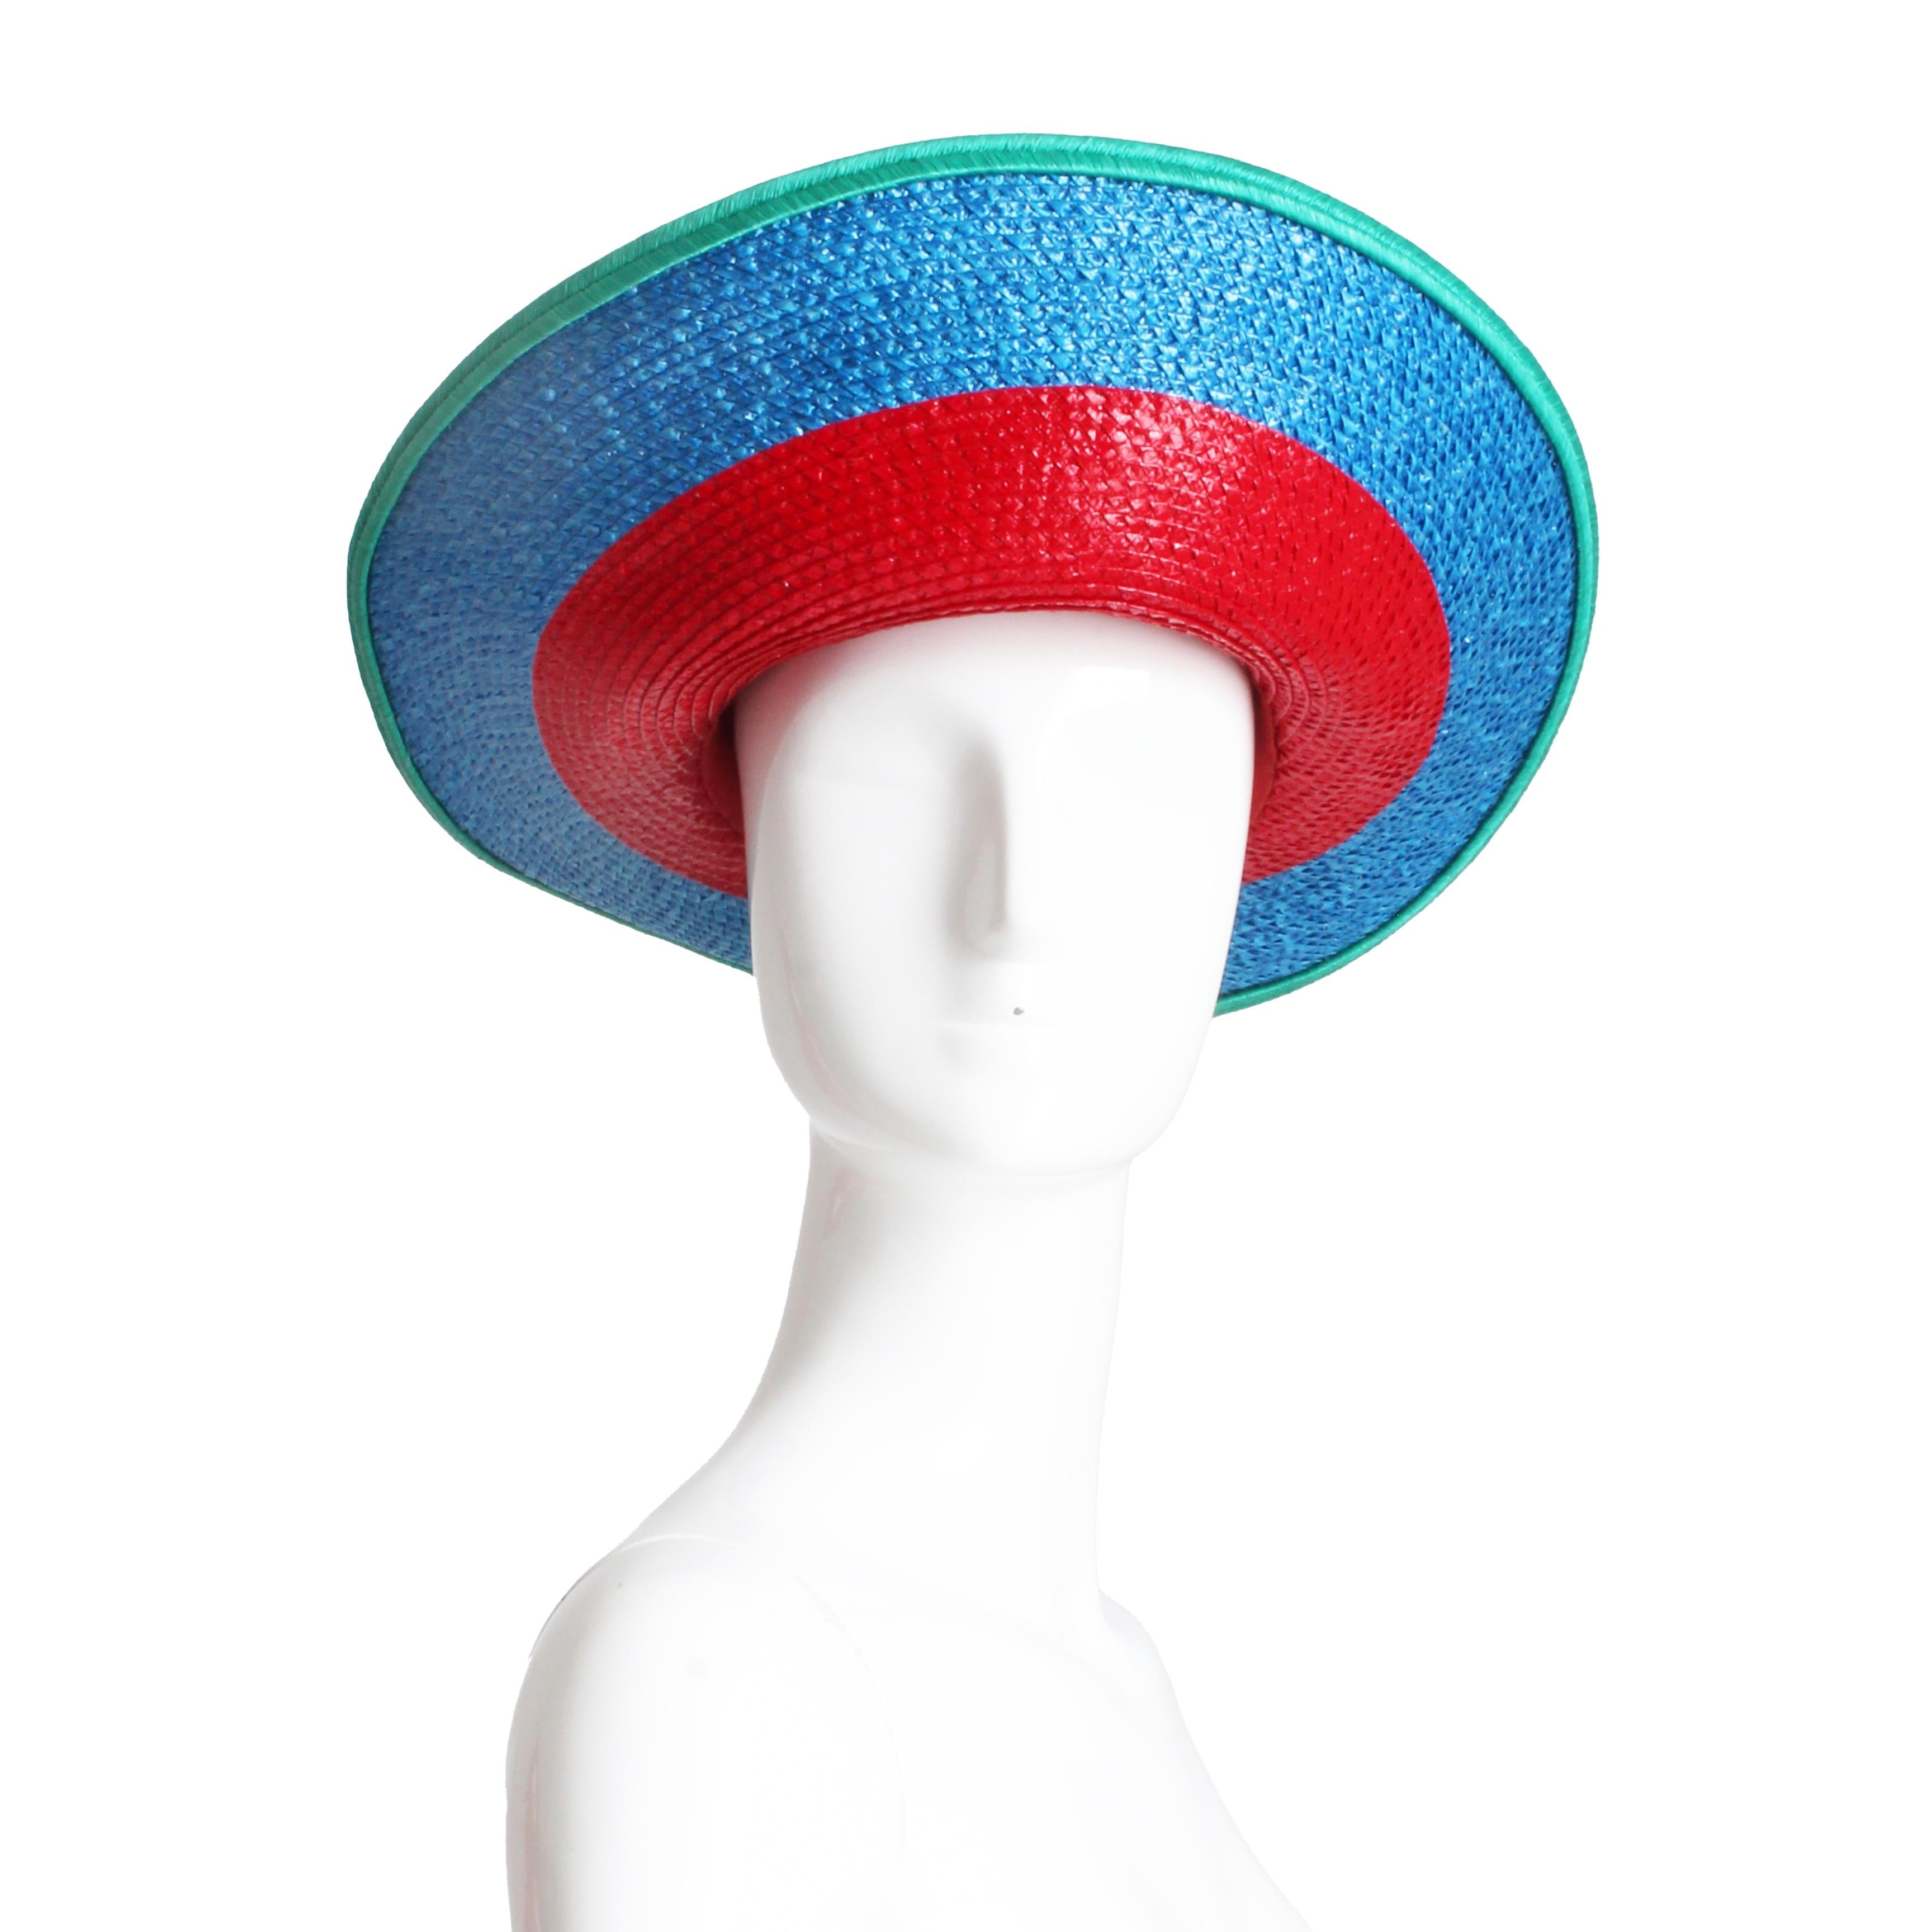 Preowned, vintage Yves Saint Laurent Rive Gauche hat, from the S/S '93 collection.  Made from straw in a color block pattern of red and blue with aqua trim, it features a halo-style wide brim.  

Yves Saint Laurent's S/S '93 collection featured